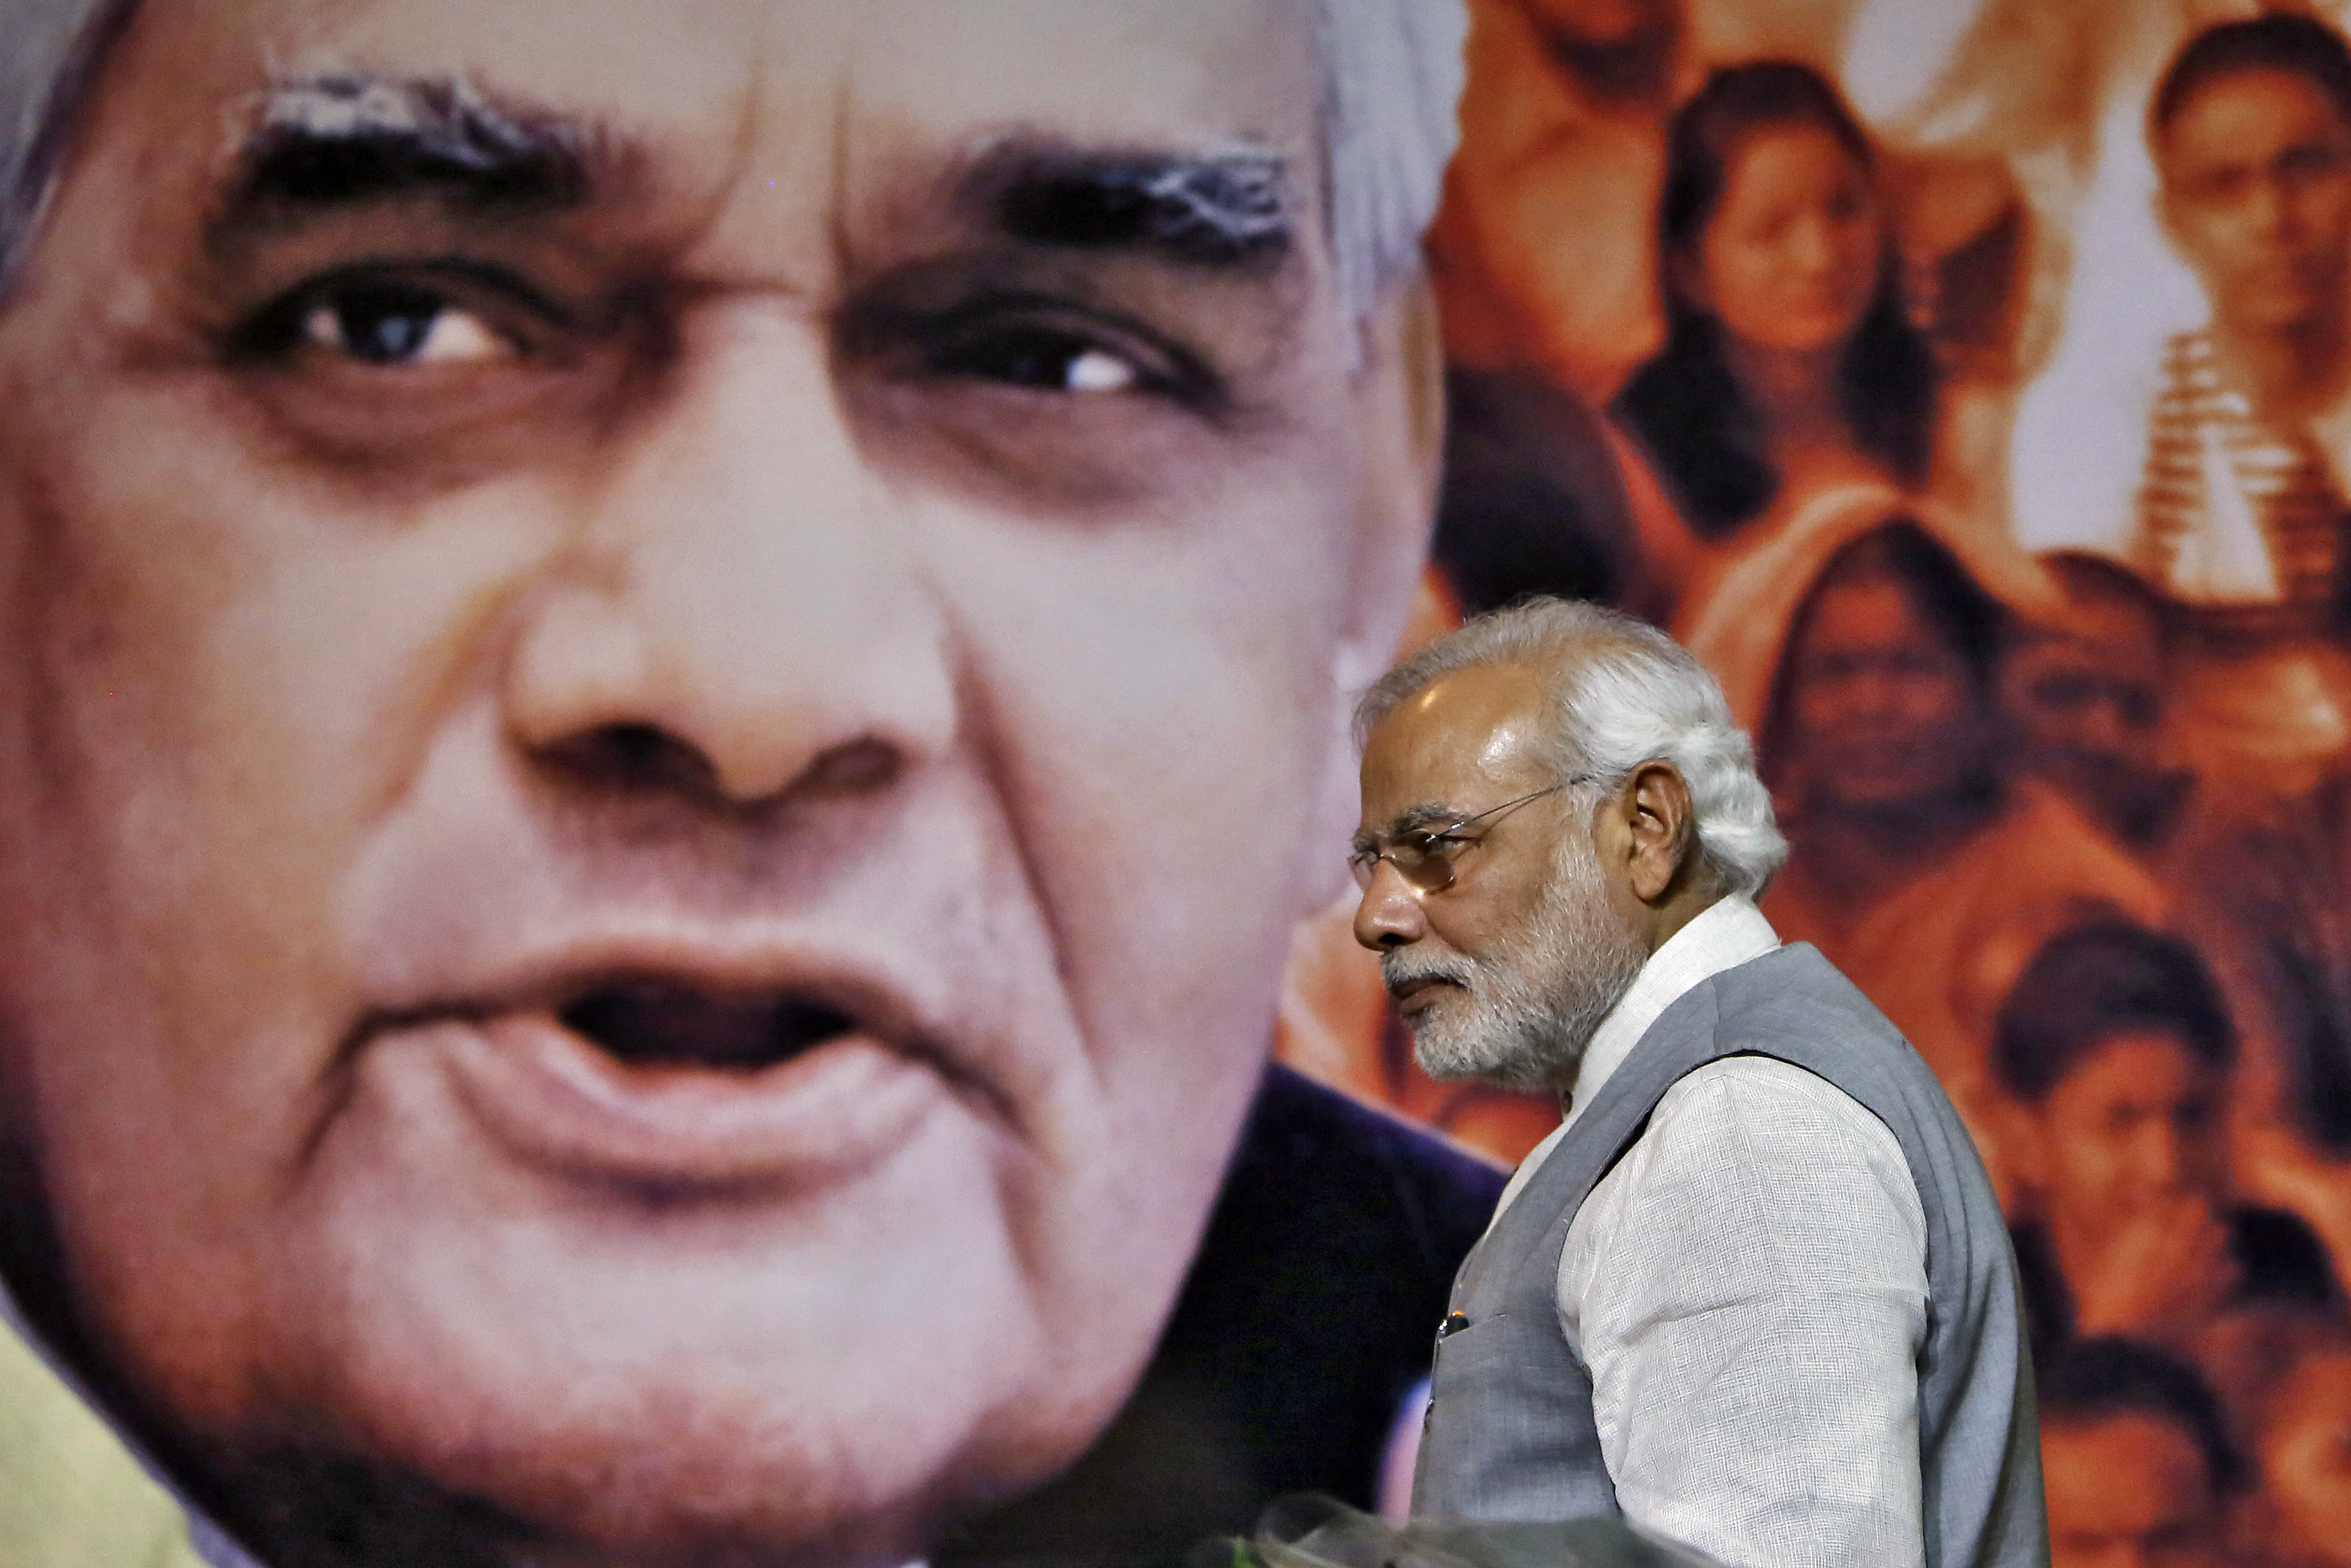 Indian Prime Minister Narendra Modi walks in front of a picture of former Indian Prime Minister Atal Bihari Vajpayee after a news conference in New Delhi on July 9, 2014. (Anindito Mukherjee—Reuters)